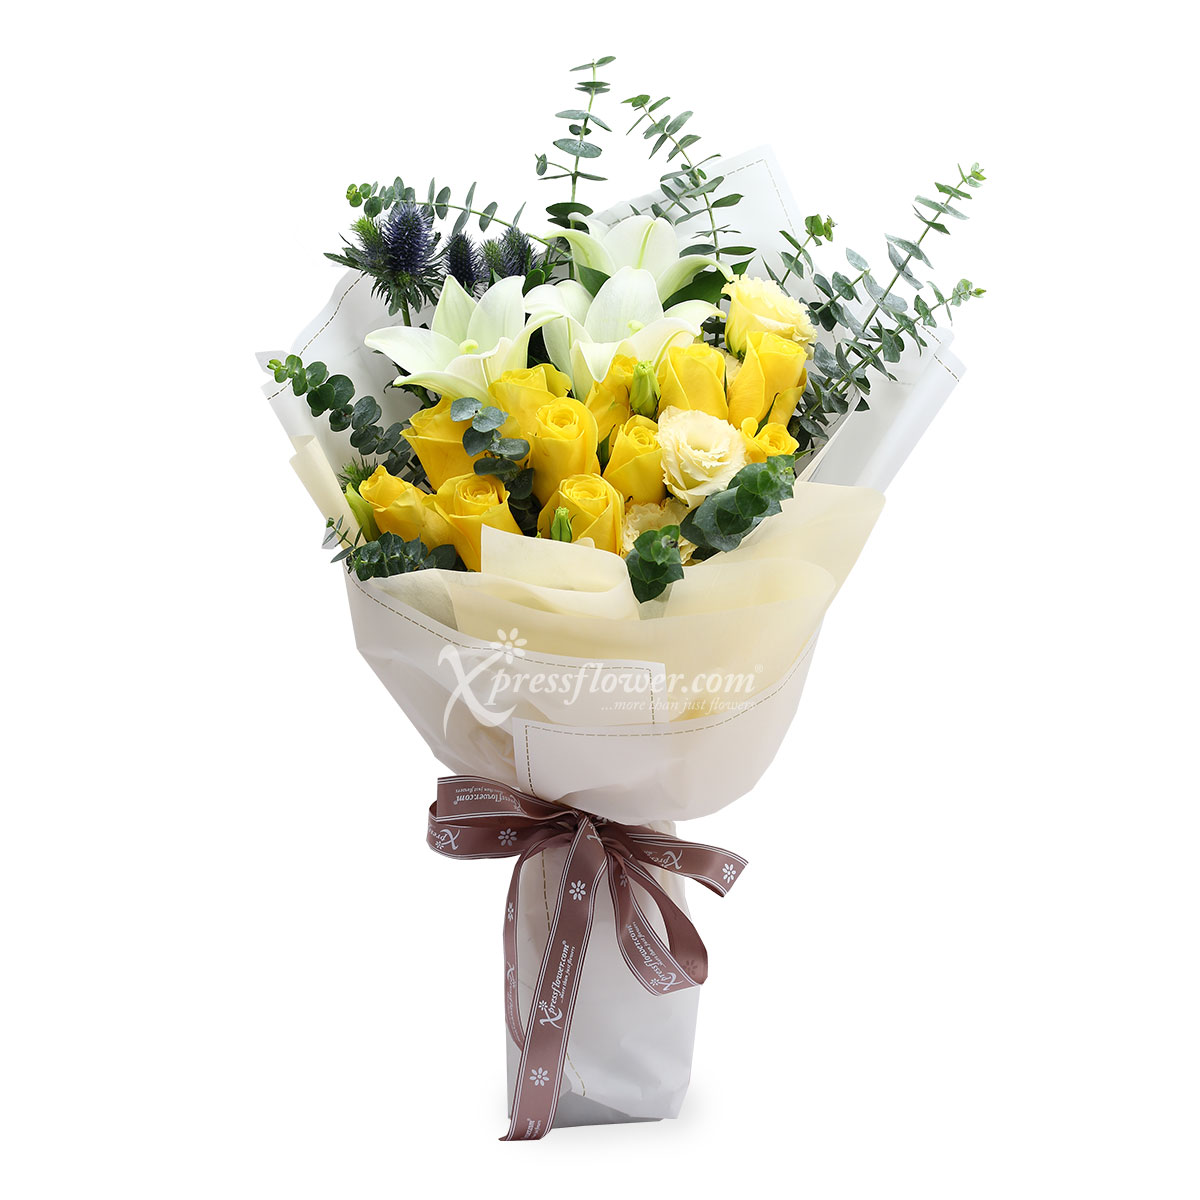 Refreshing Charms (12 Yellow Roses & 3 White Lilies)